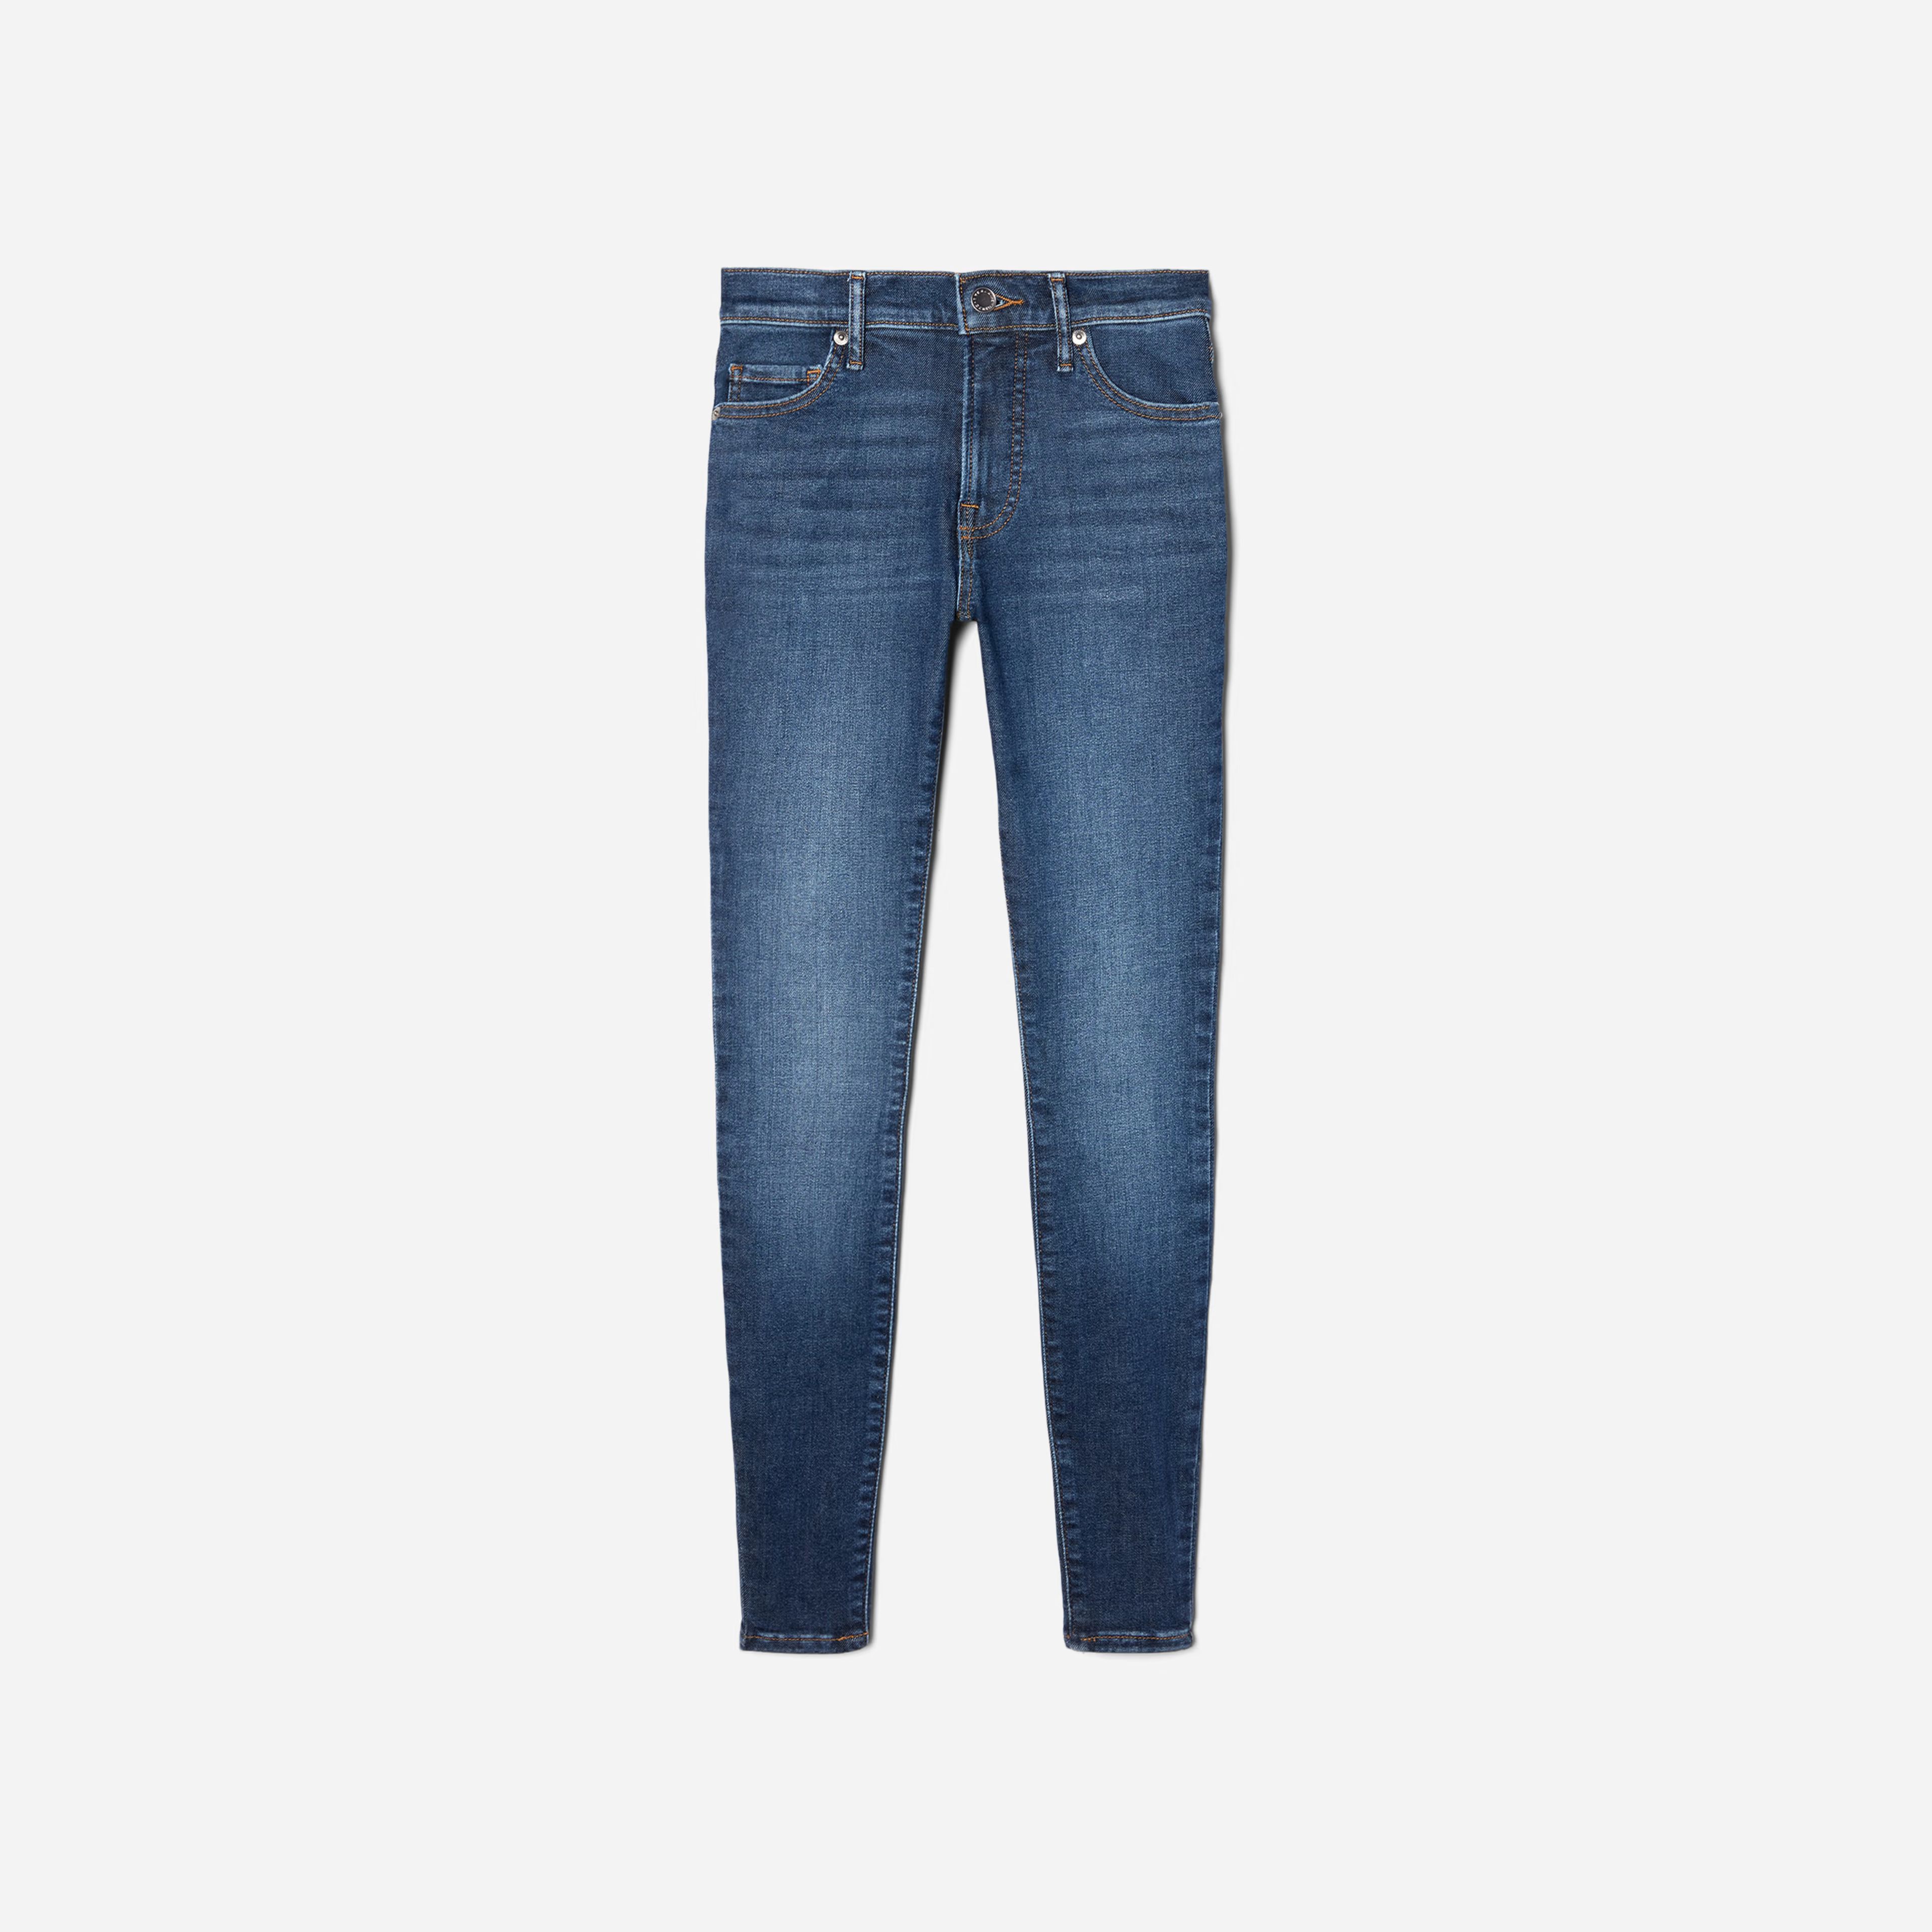 The Mid-Rise Skinny Stretch Jean | Everlane